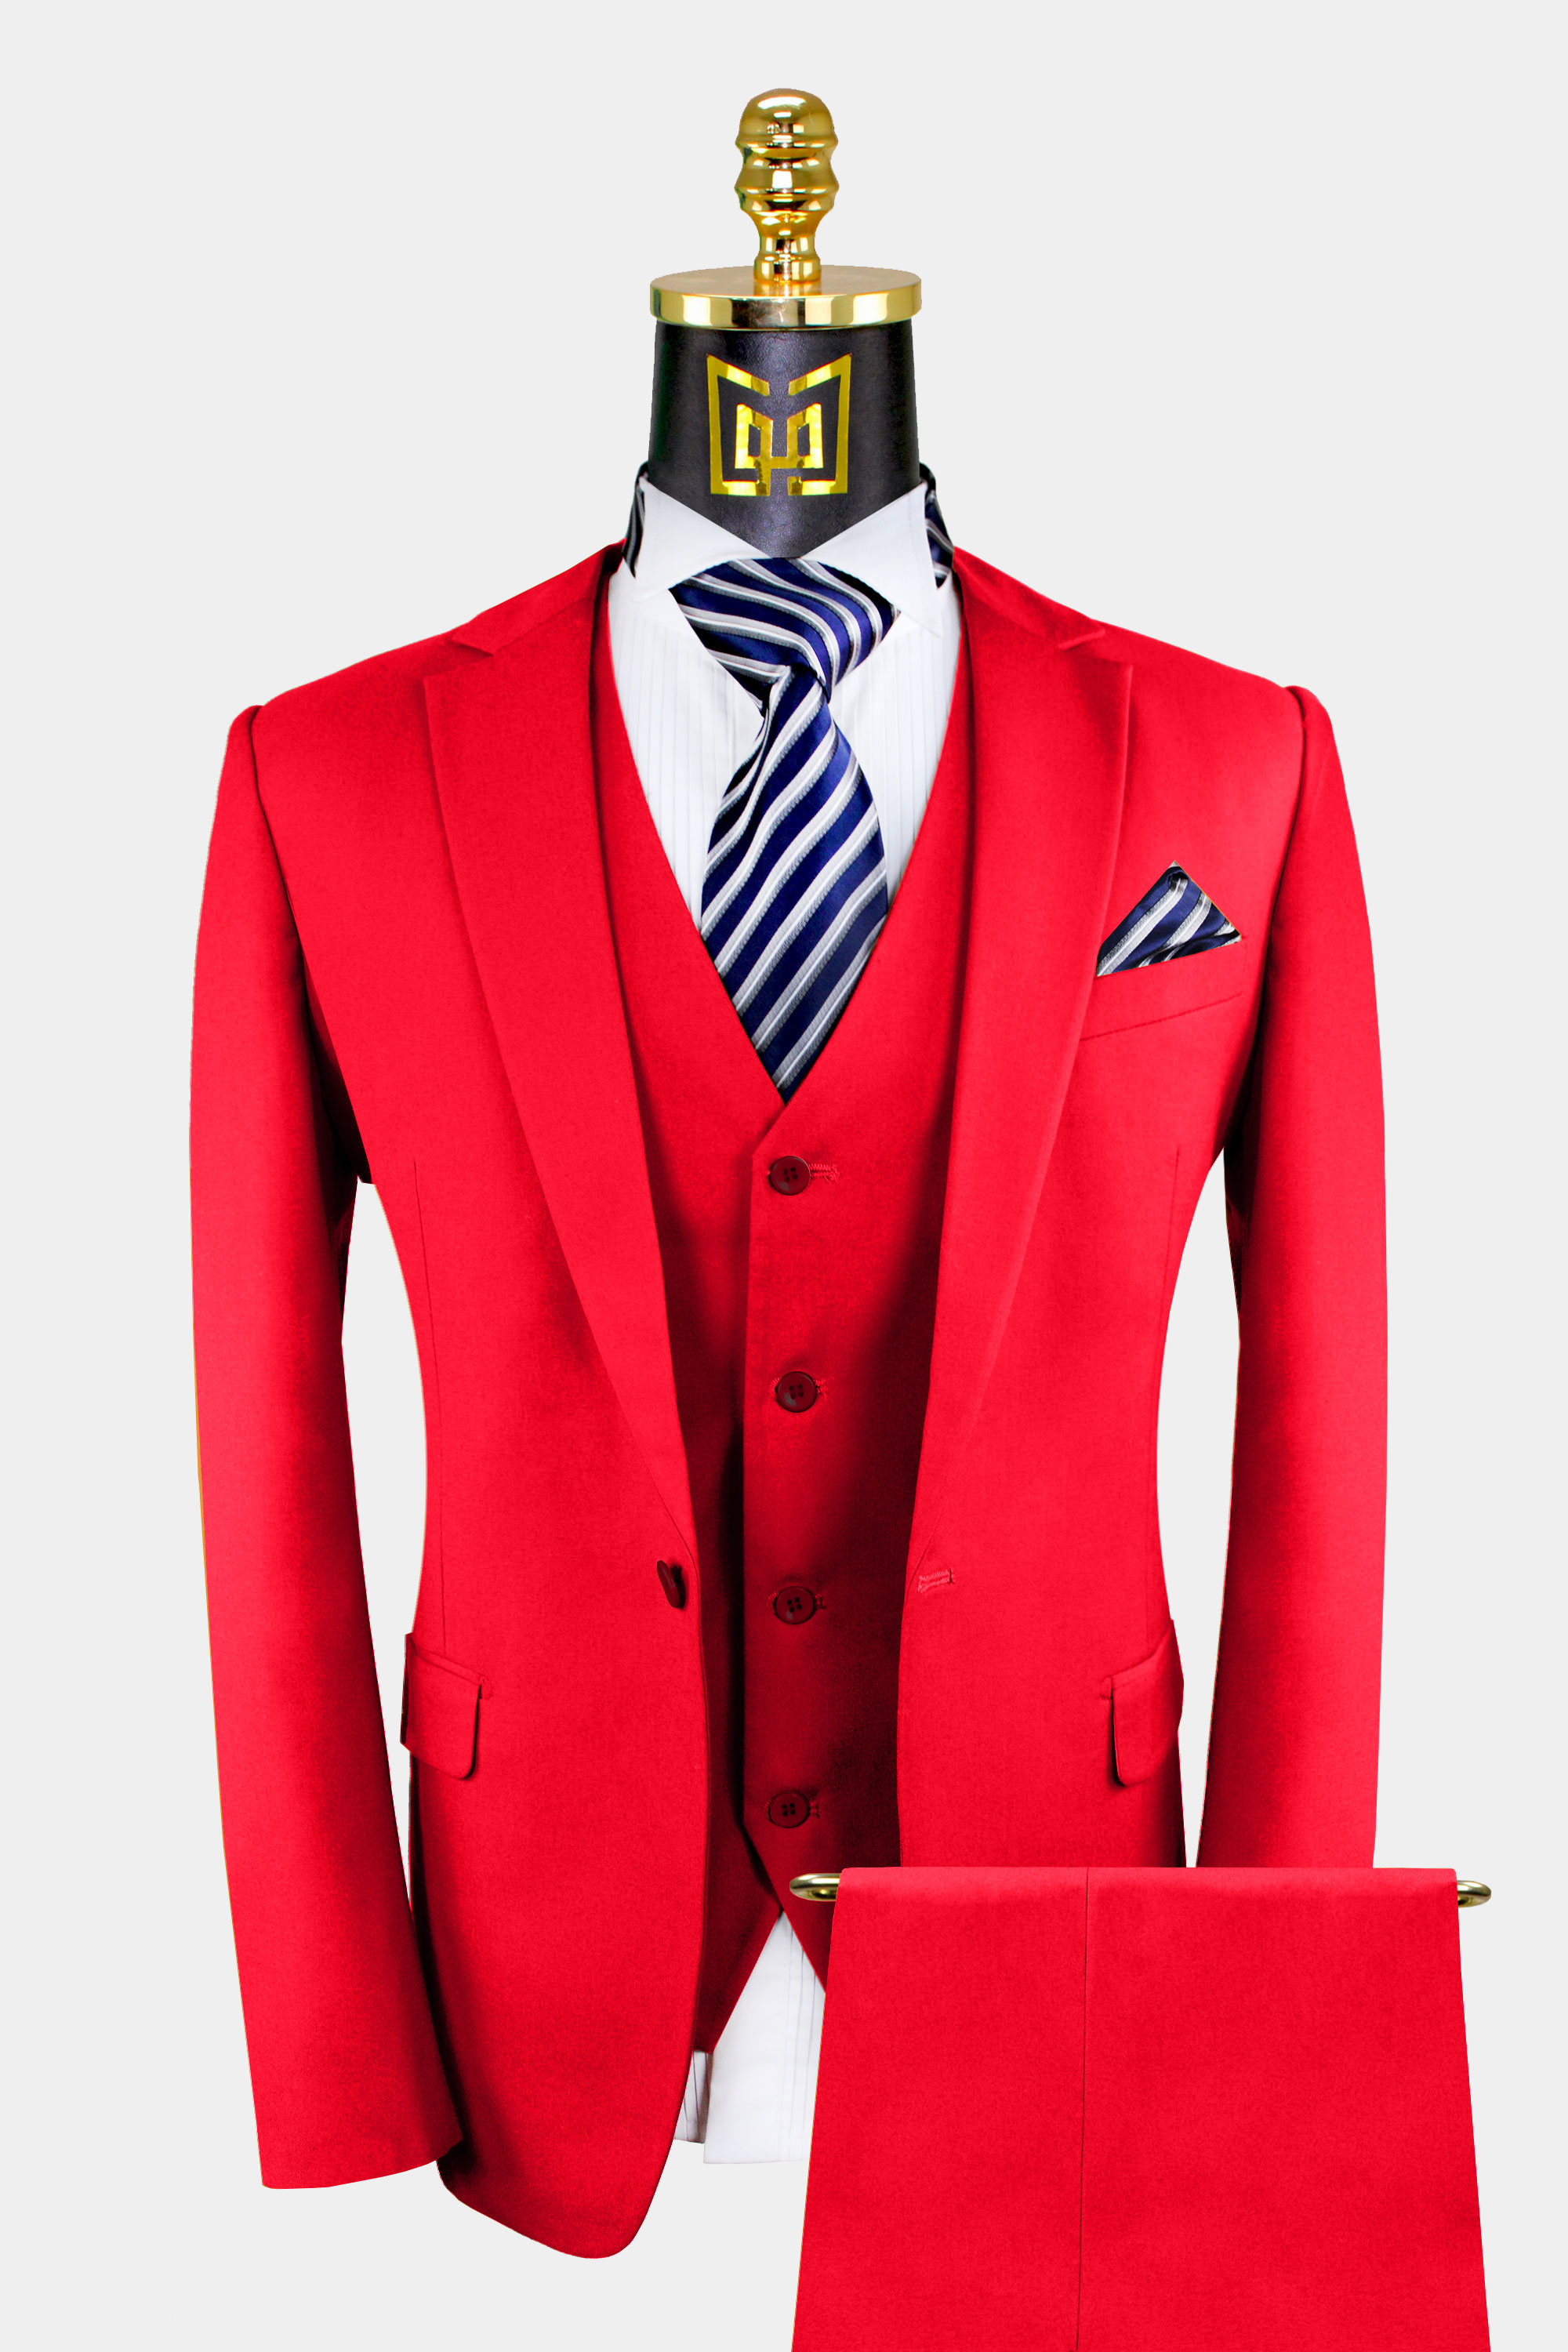 All Red Suit - 3 Piece